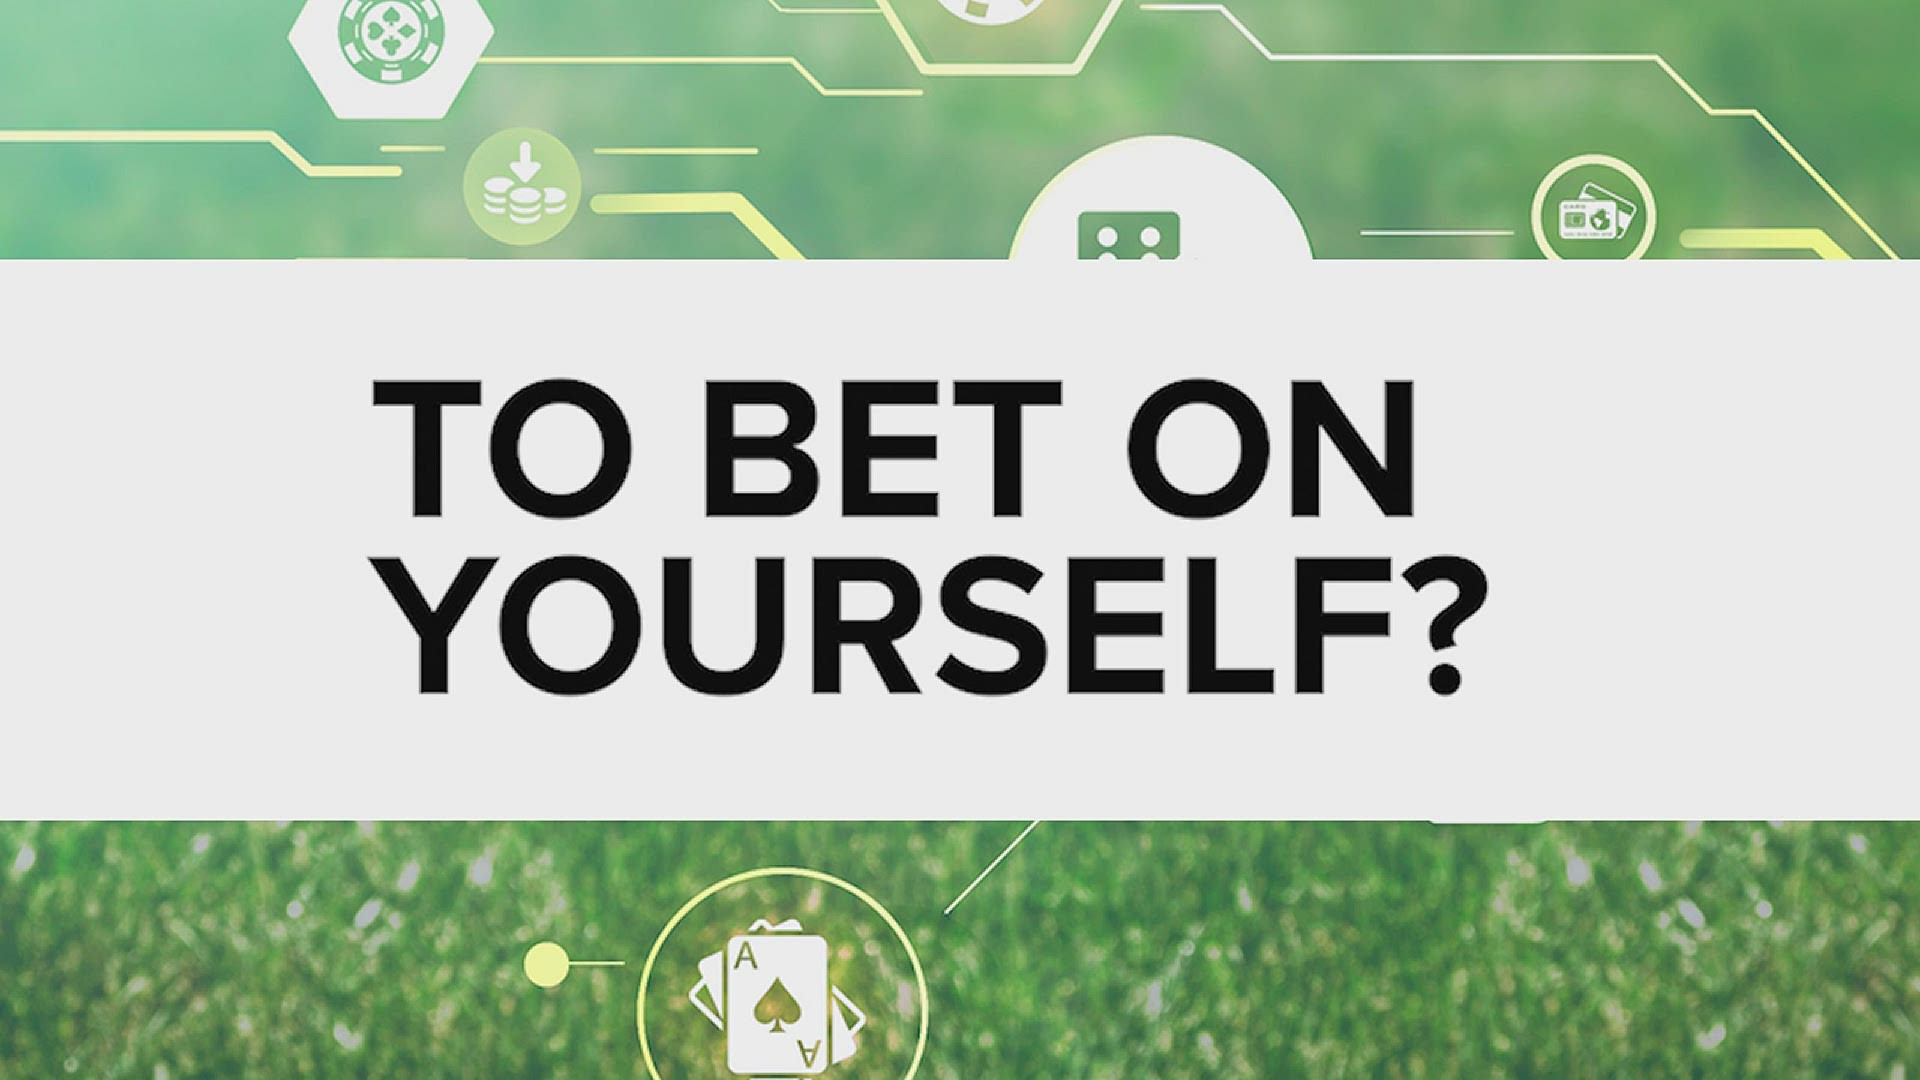 Consumer attorney Charles Gallagher discusses whether it's legal to bet on yourself.